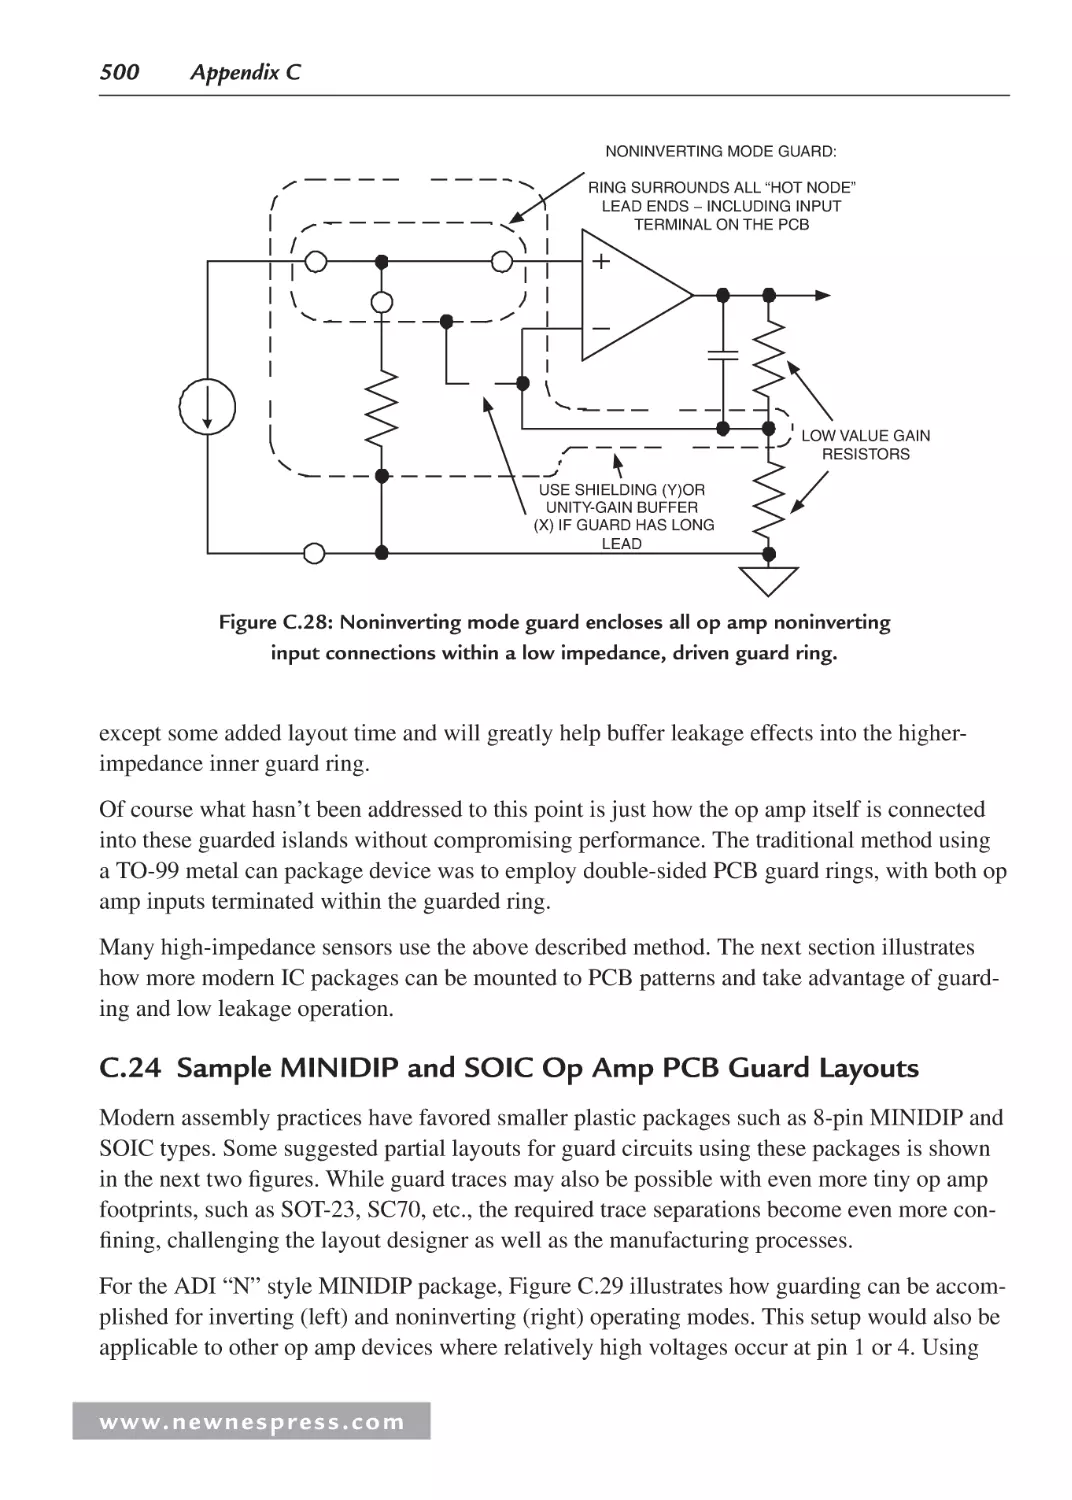 C.24 Sample MINIDIP and SOIC Op Amp PCB Guard Layouts